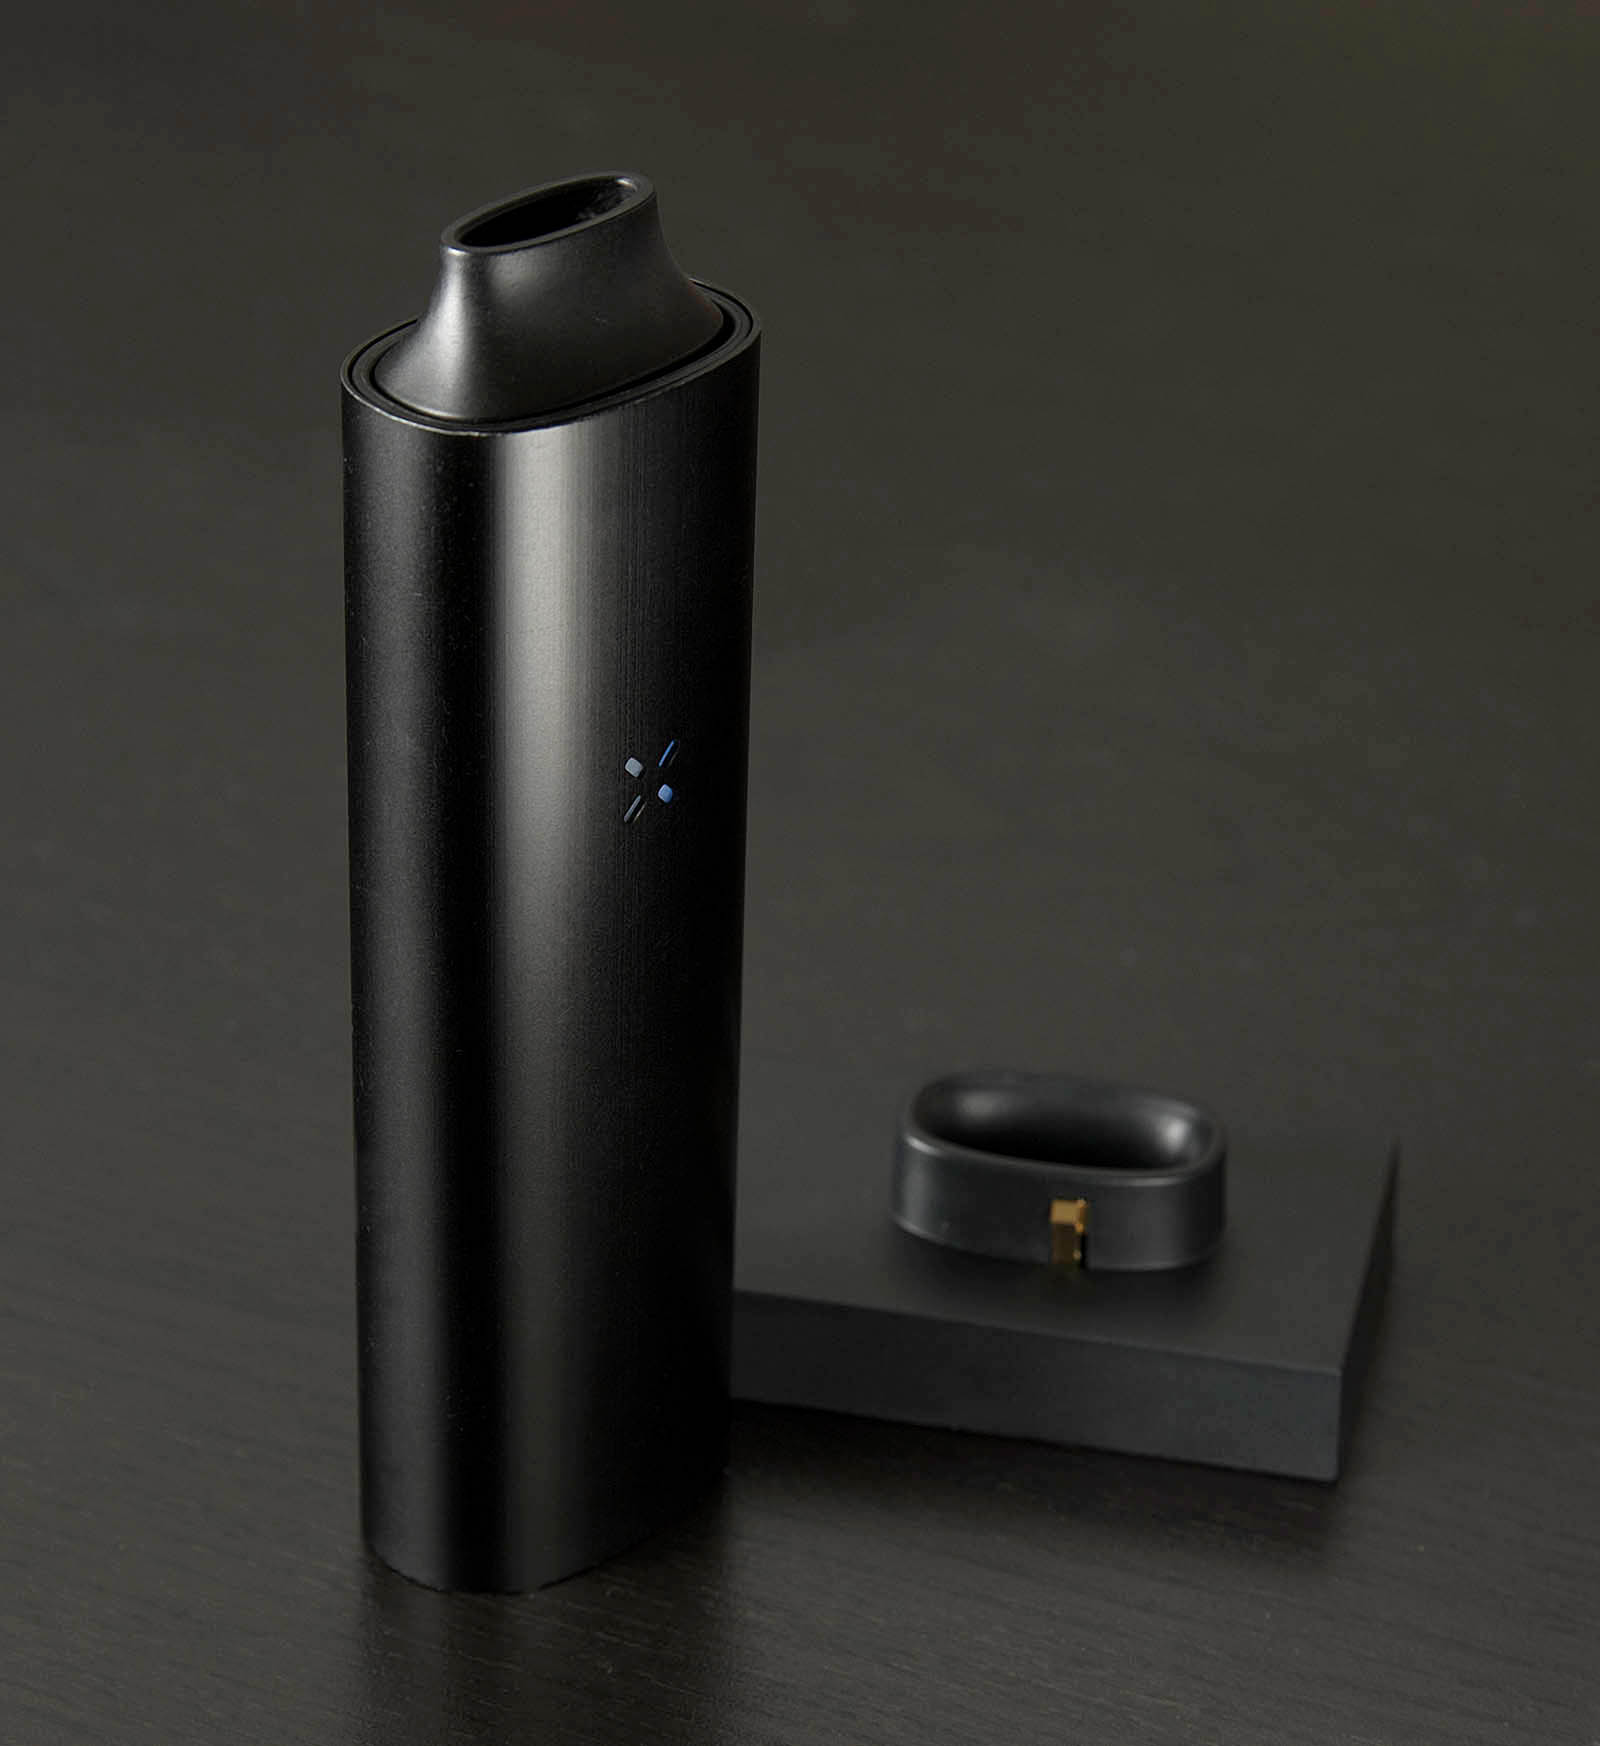 Pax by Ploom Portable Vaporizer Review - Weedist